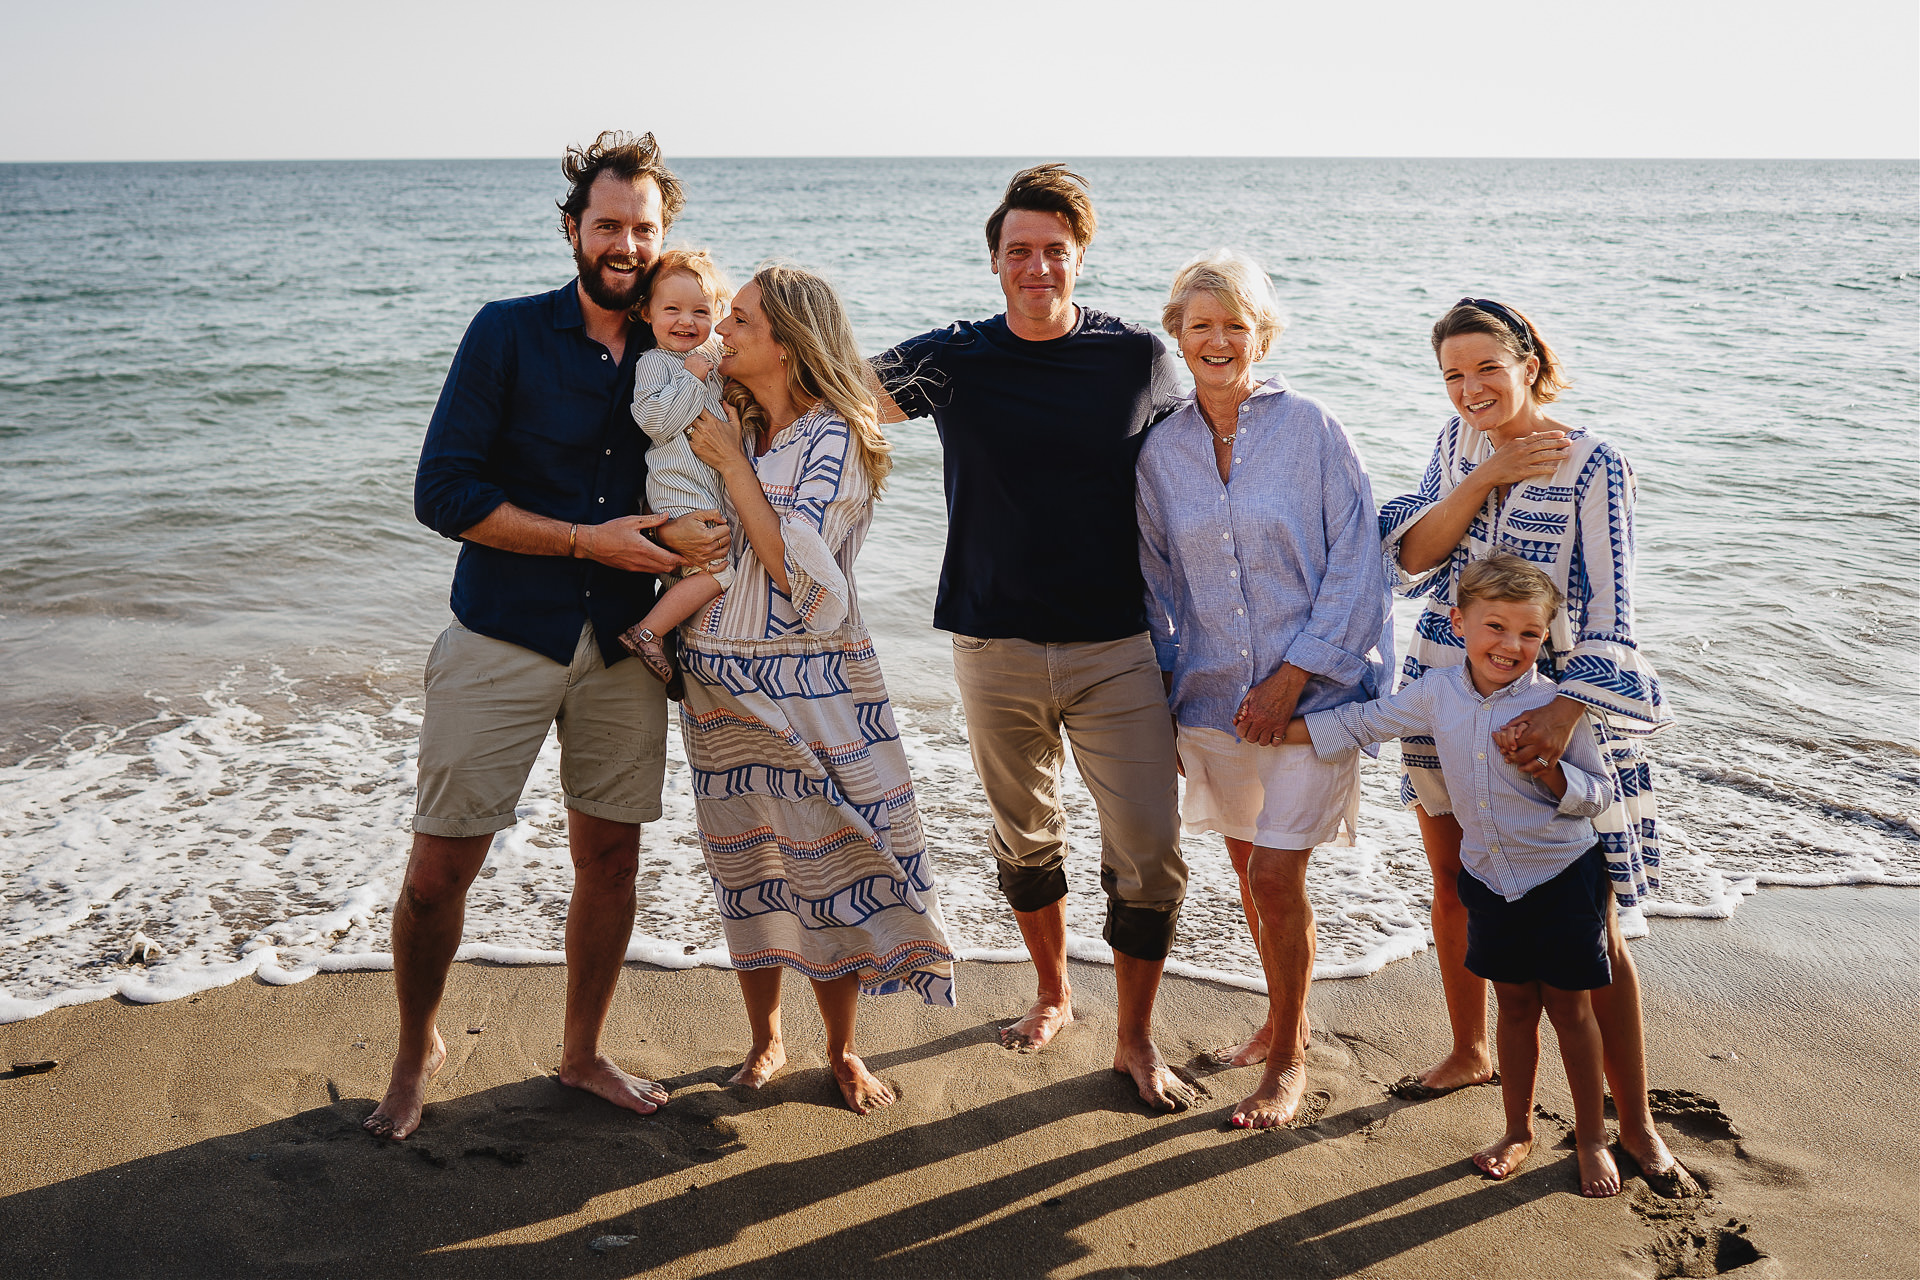 A relaxed family photograph on the beach at sunset